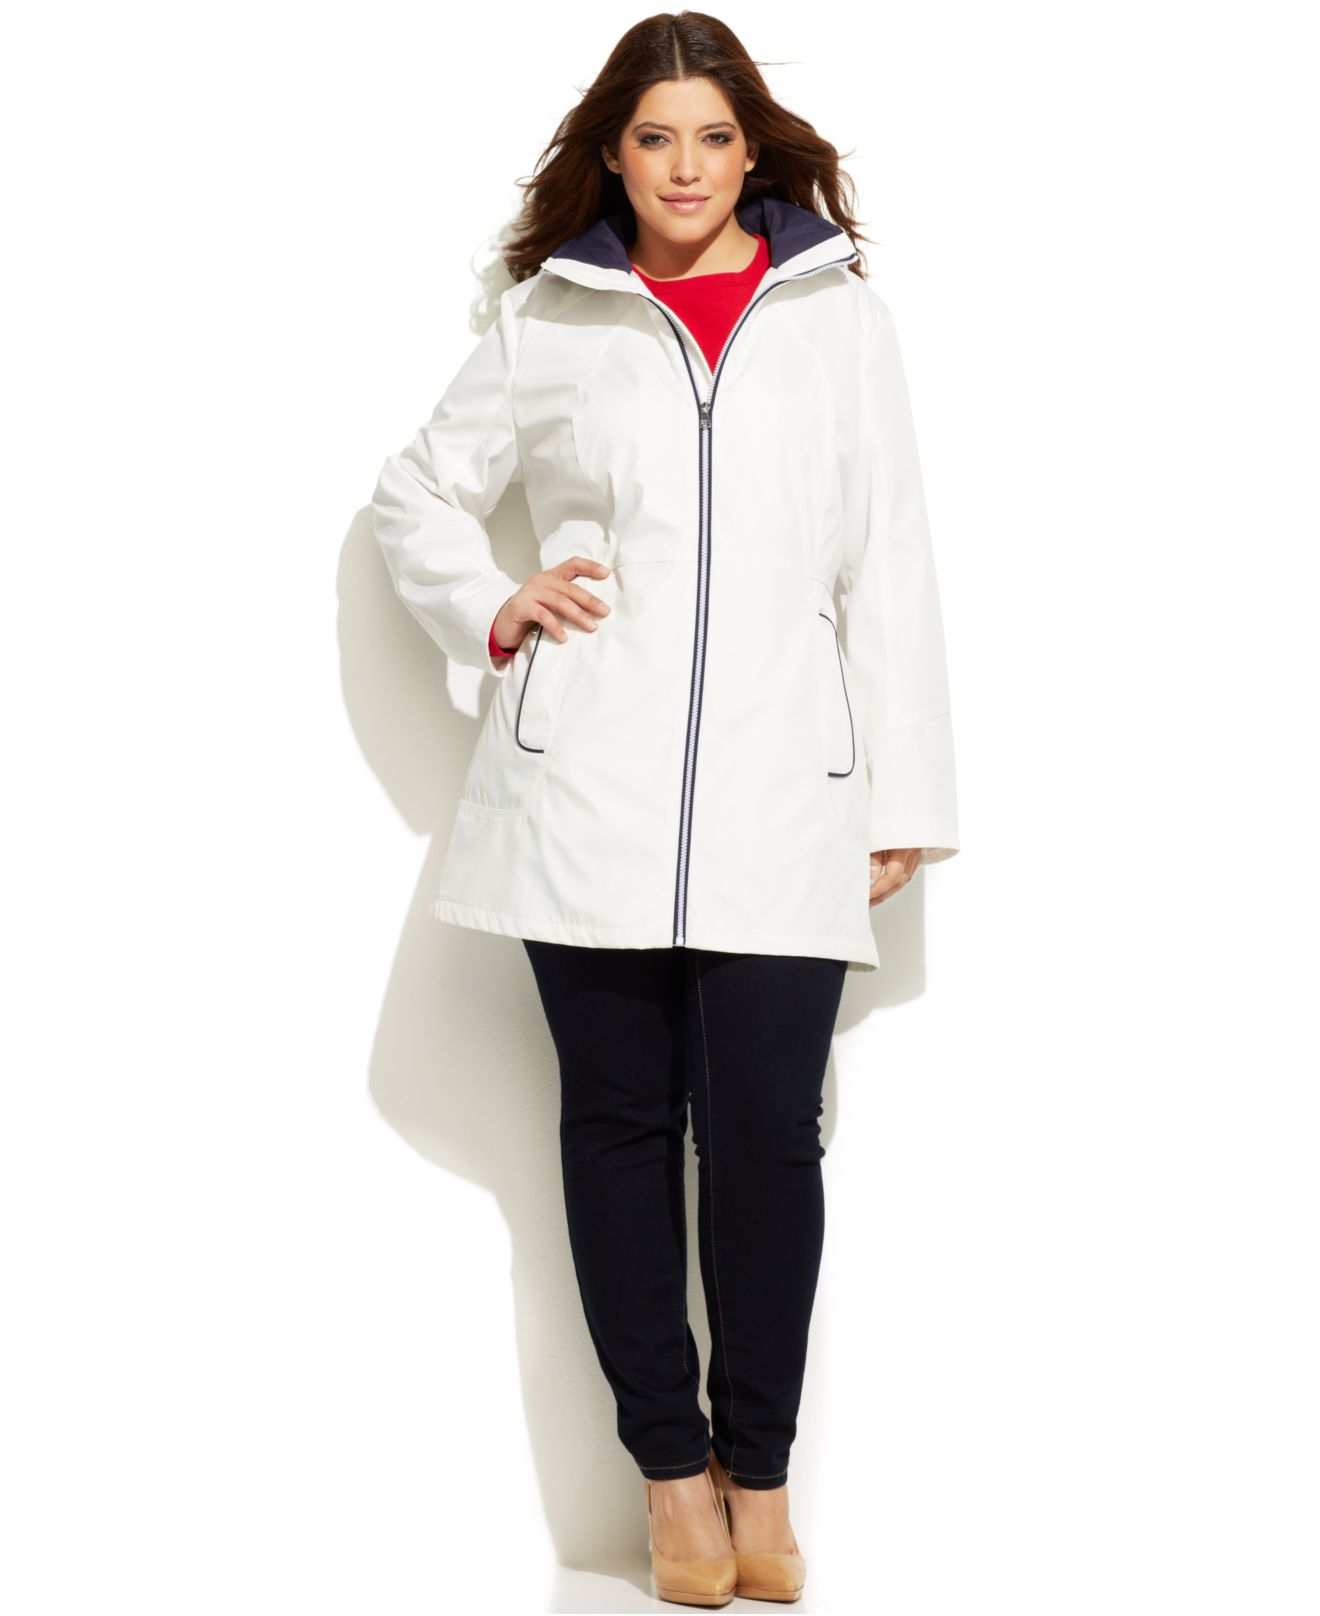 Lyst - Jessica Simpson Plus Size Hooded Zip-Front Jacket in White